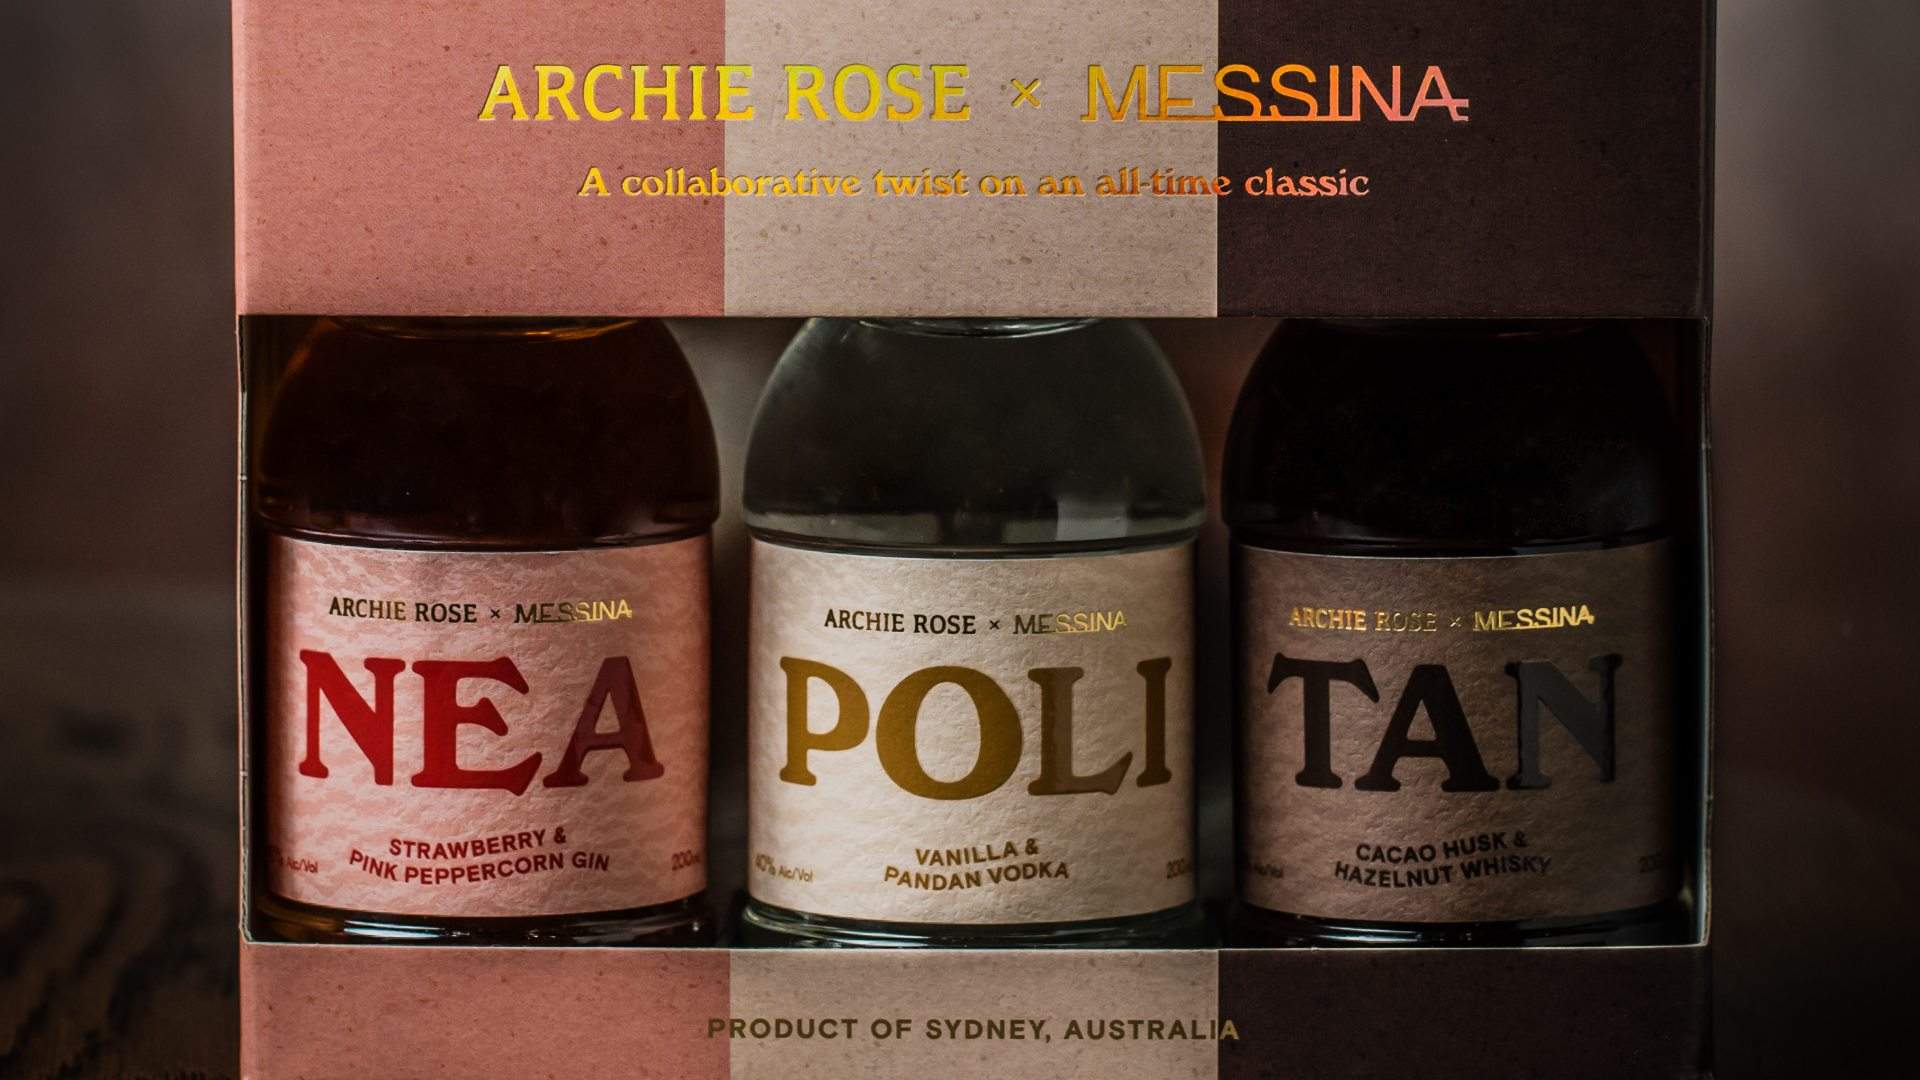 This New Archie Rose and Messina Collaboration Is a Boozy Riff on Classic Neapolitan Ice Cream